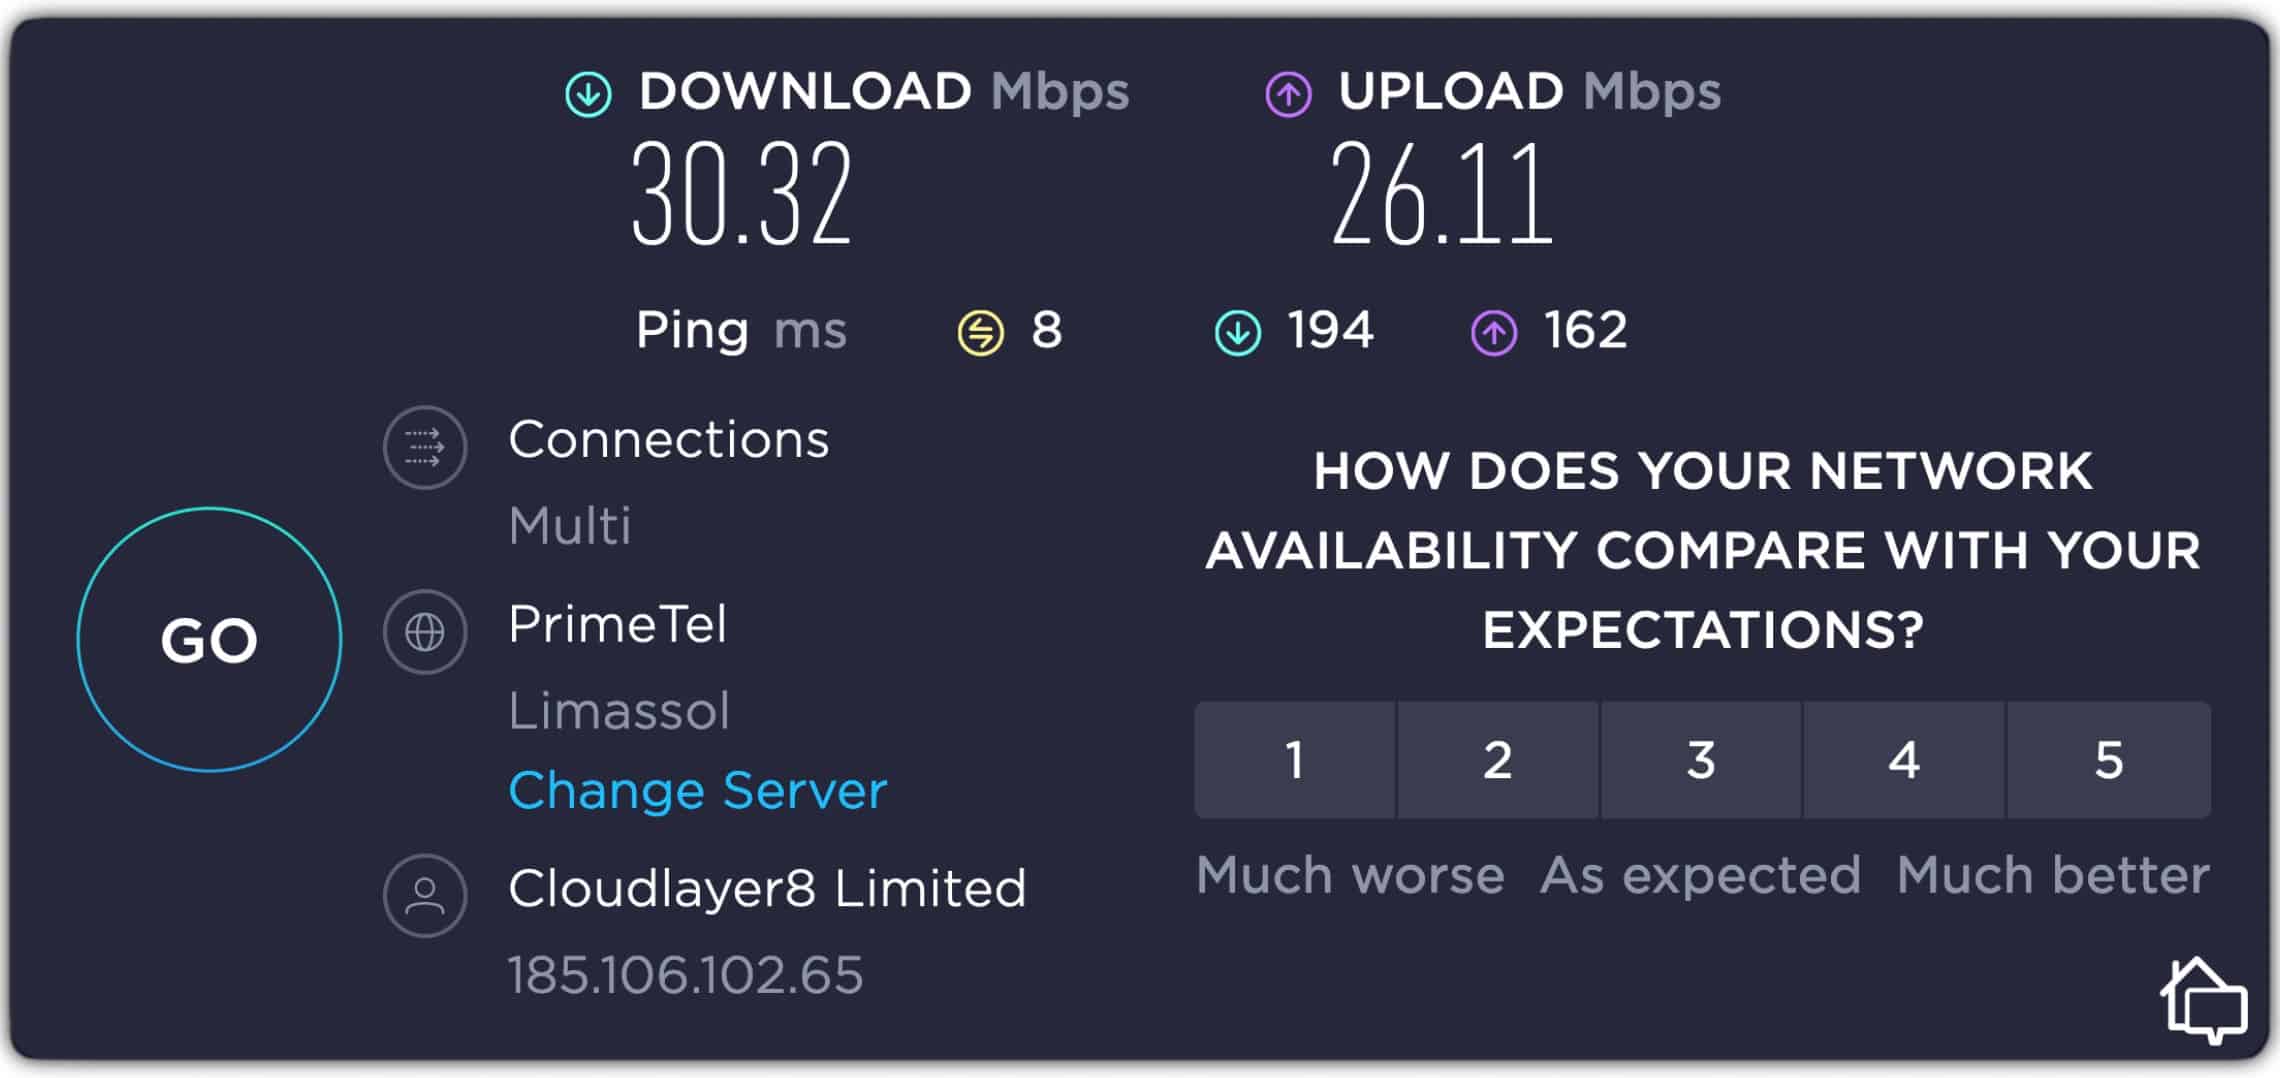 X-VPN really hobbled my connection speed the first time around. Protocol unknown.